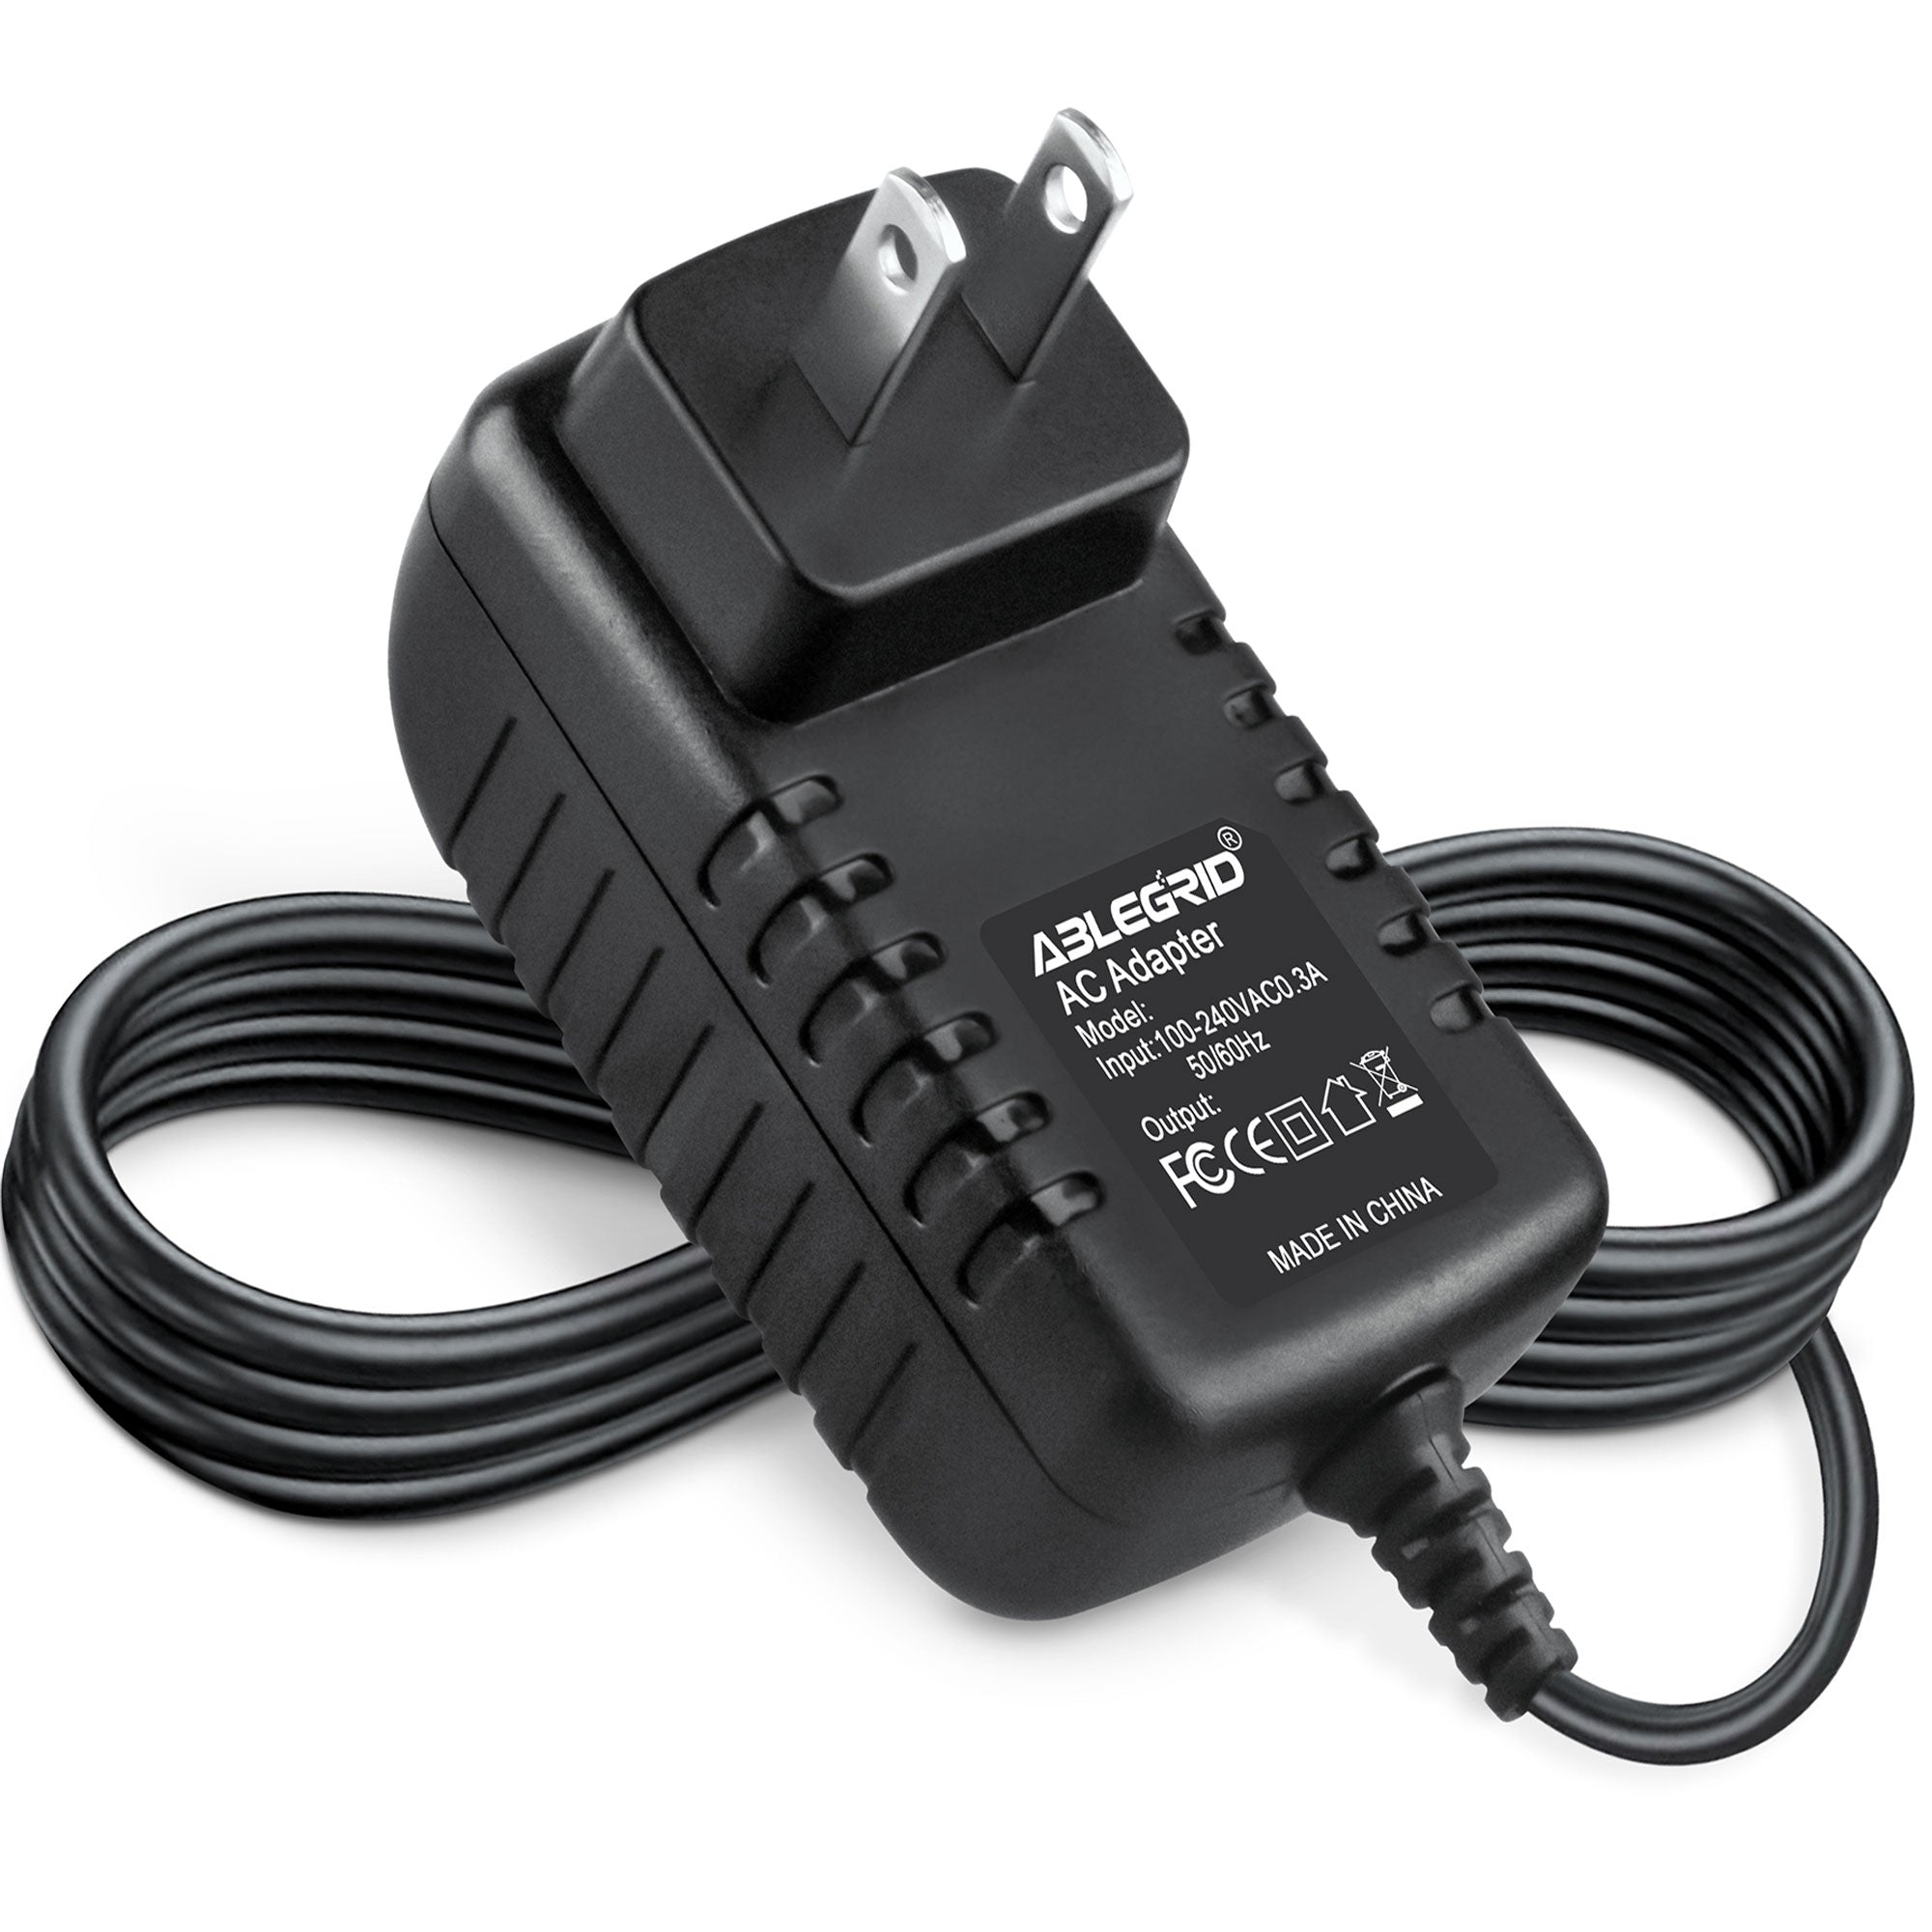 AbleGrid AC / DC Adapter for Wahl Model: S004MU0400090 PT# 97581-1105 Shaver Trimmer Class 2 Power Supply (w/ Barrel Round Plug Tip. NOT 2-Prong Connector)